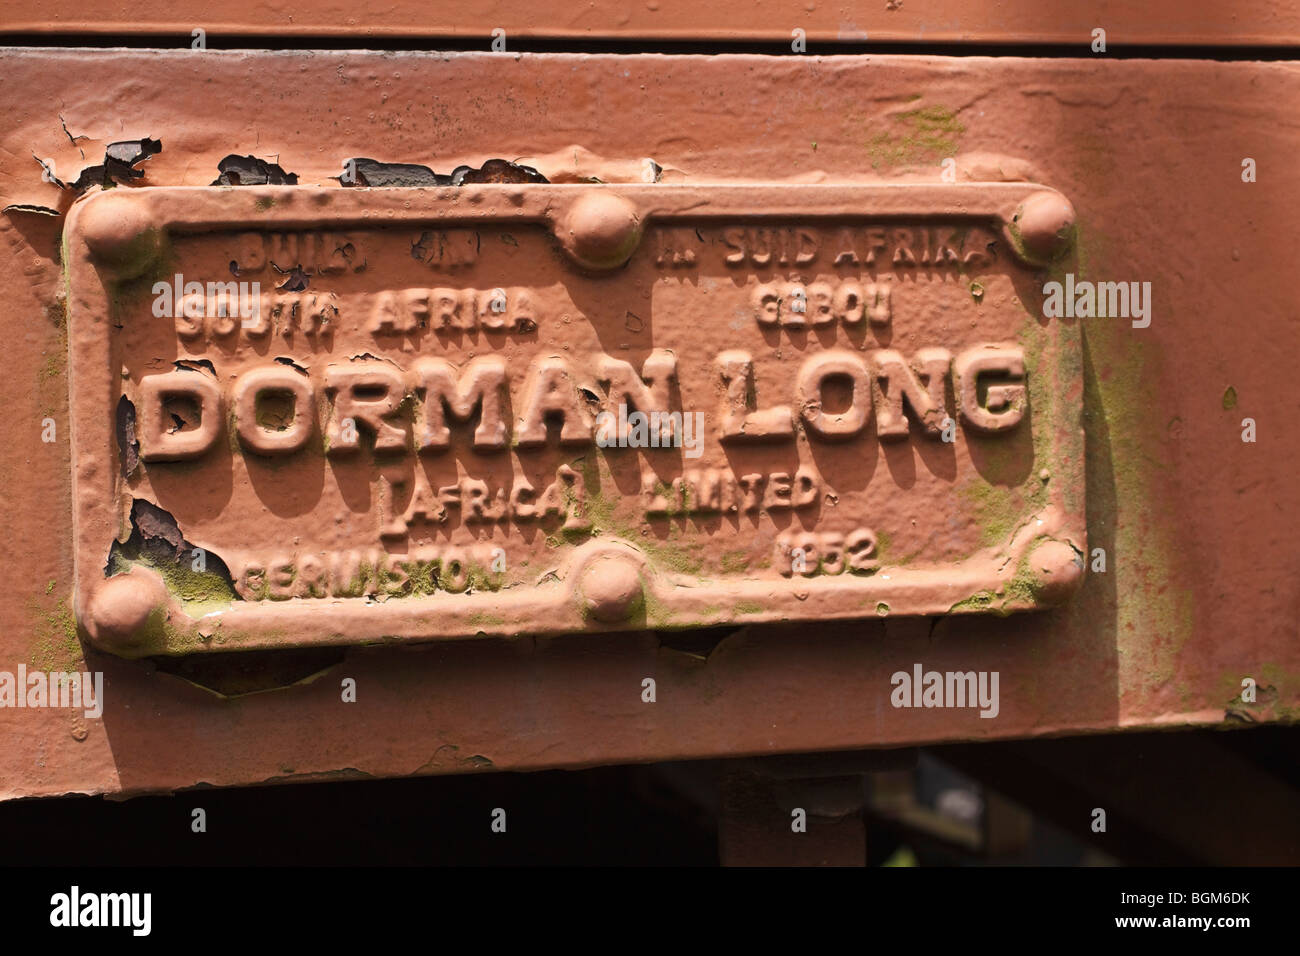 Plaque on side of railway coach showing manufacturer and date from 1952. South Africa. Stock Photo